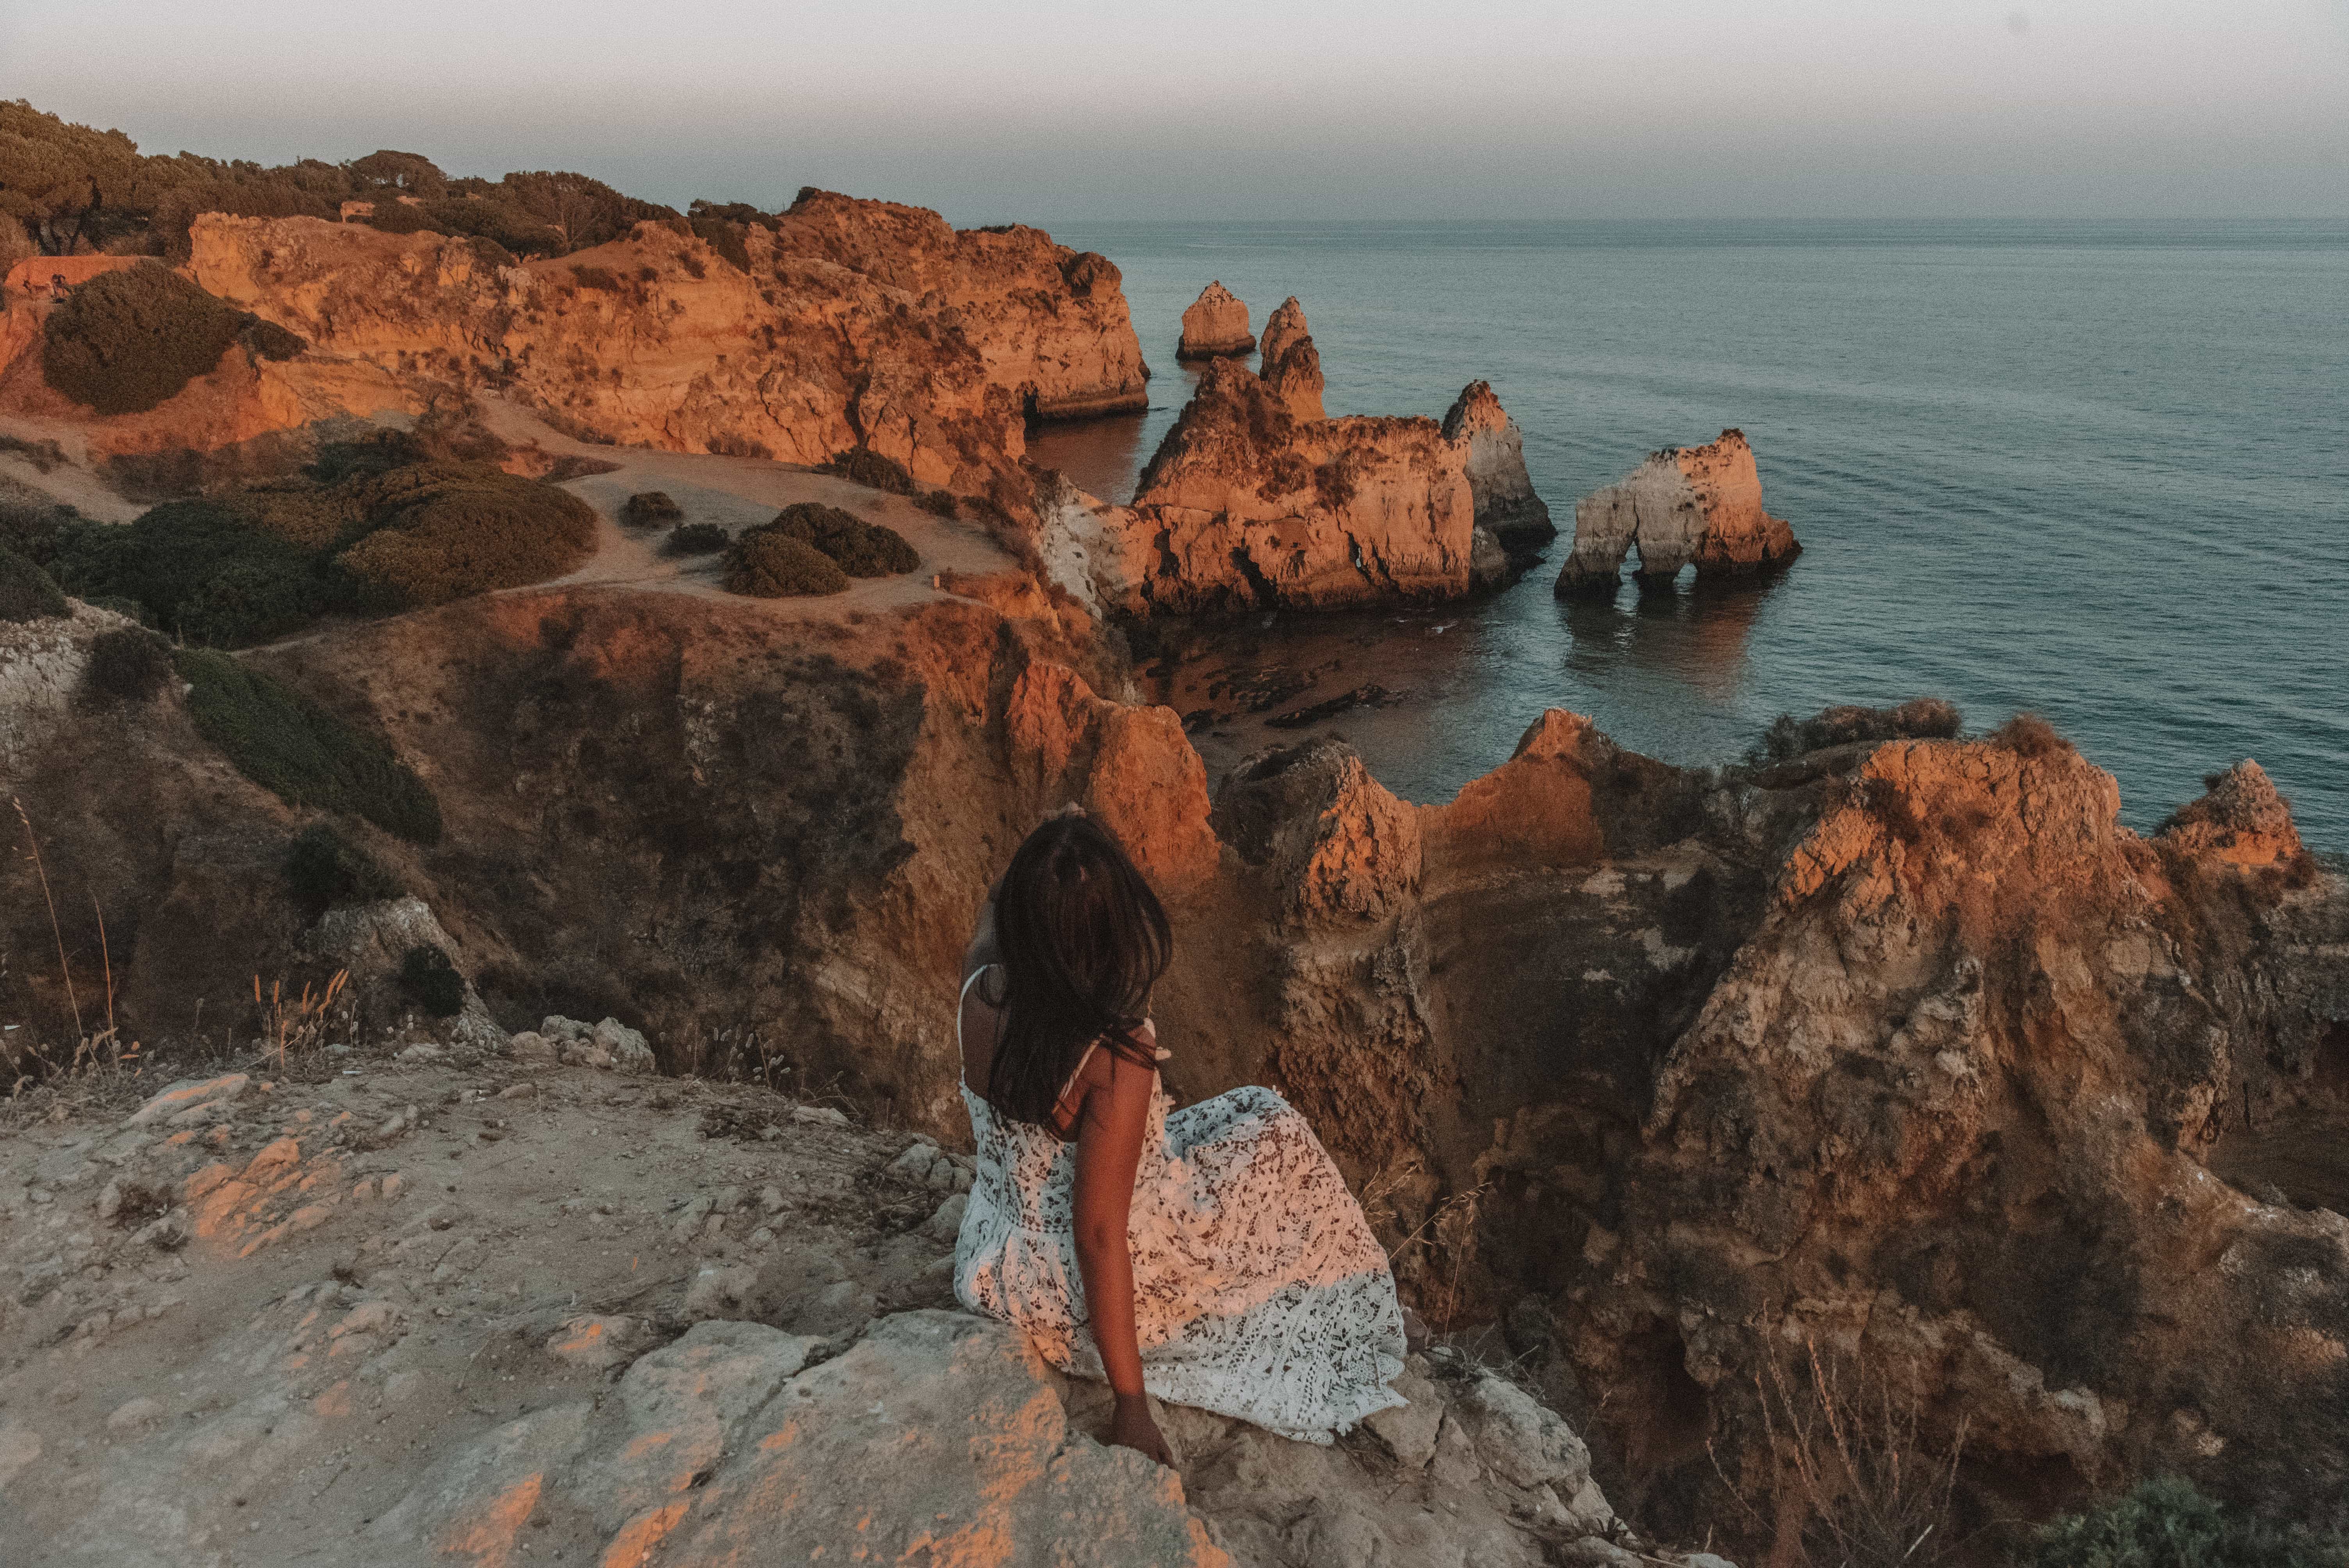 Instagrammable places in Portugal, Praia dos tres Irmaos